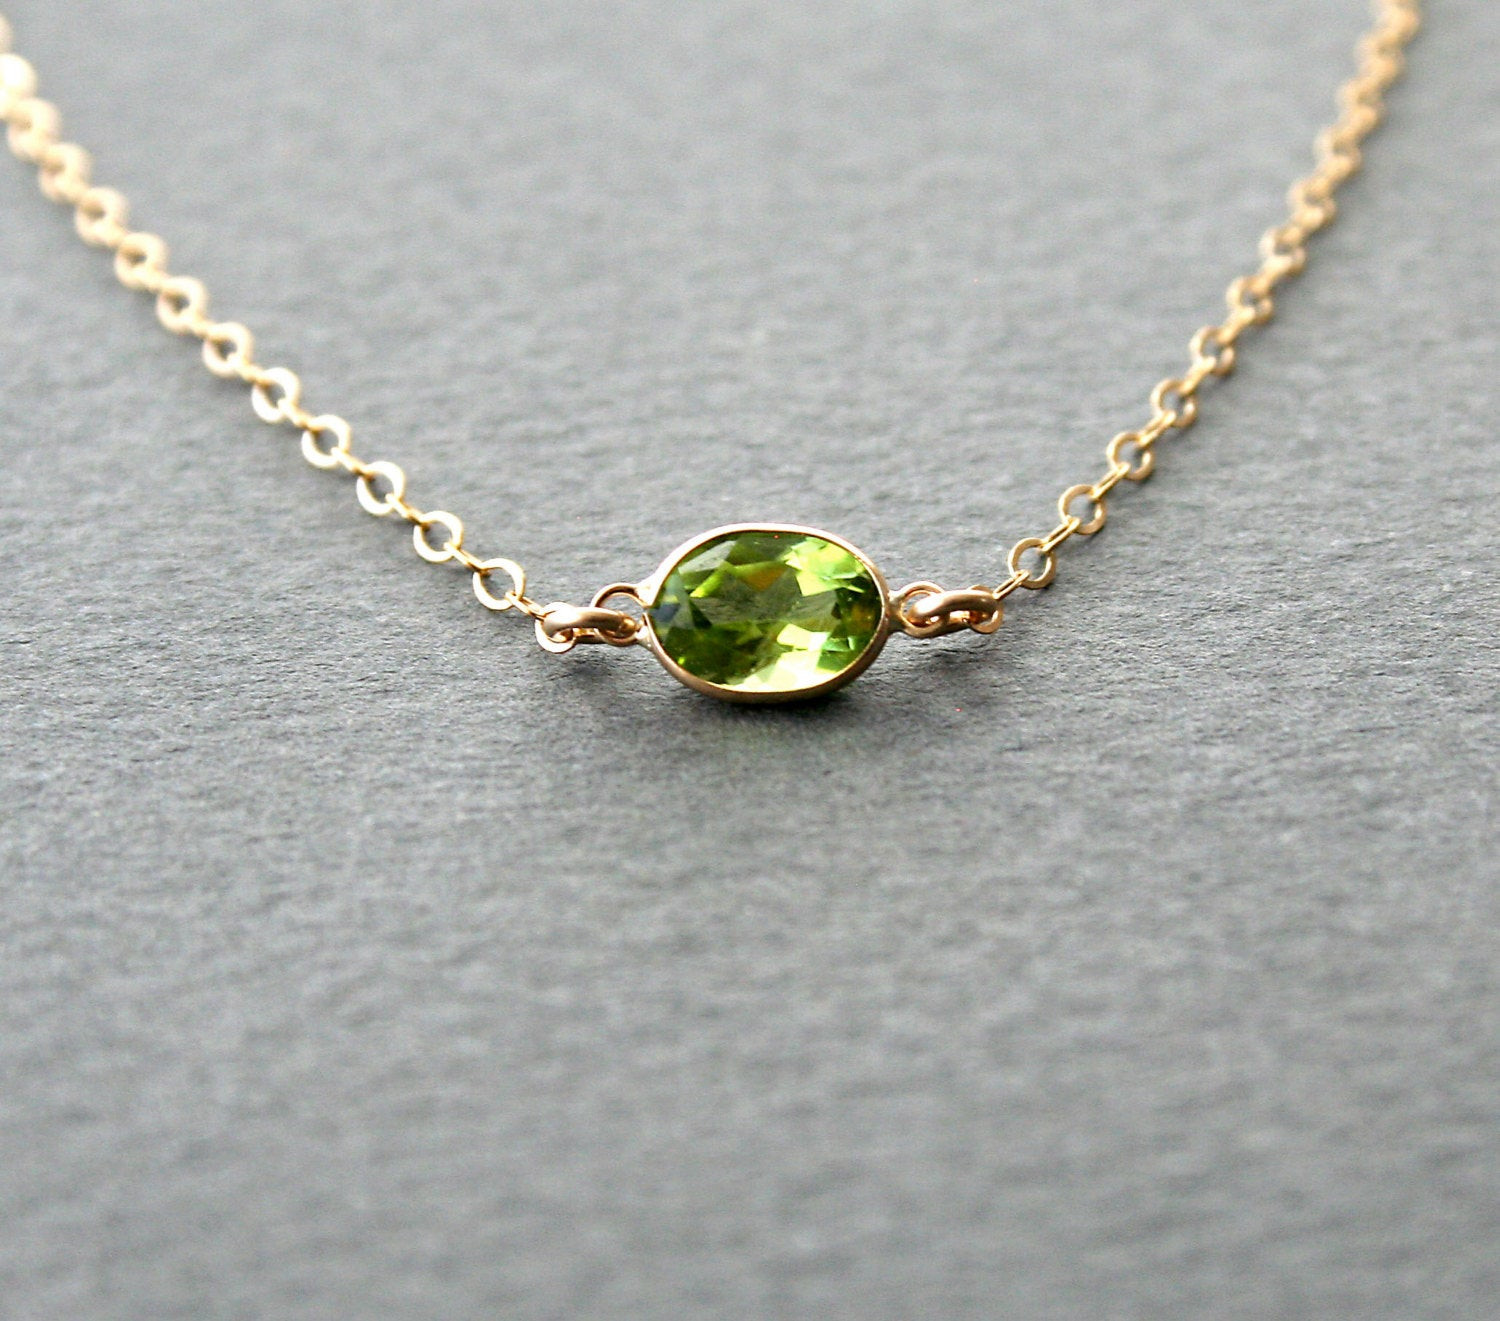 August Birthstone Necklace
 Gold Peridot Necklace August Birthstone Jewelry